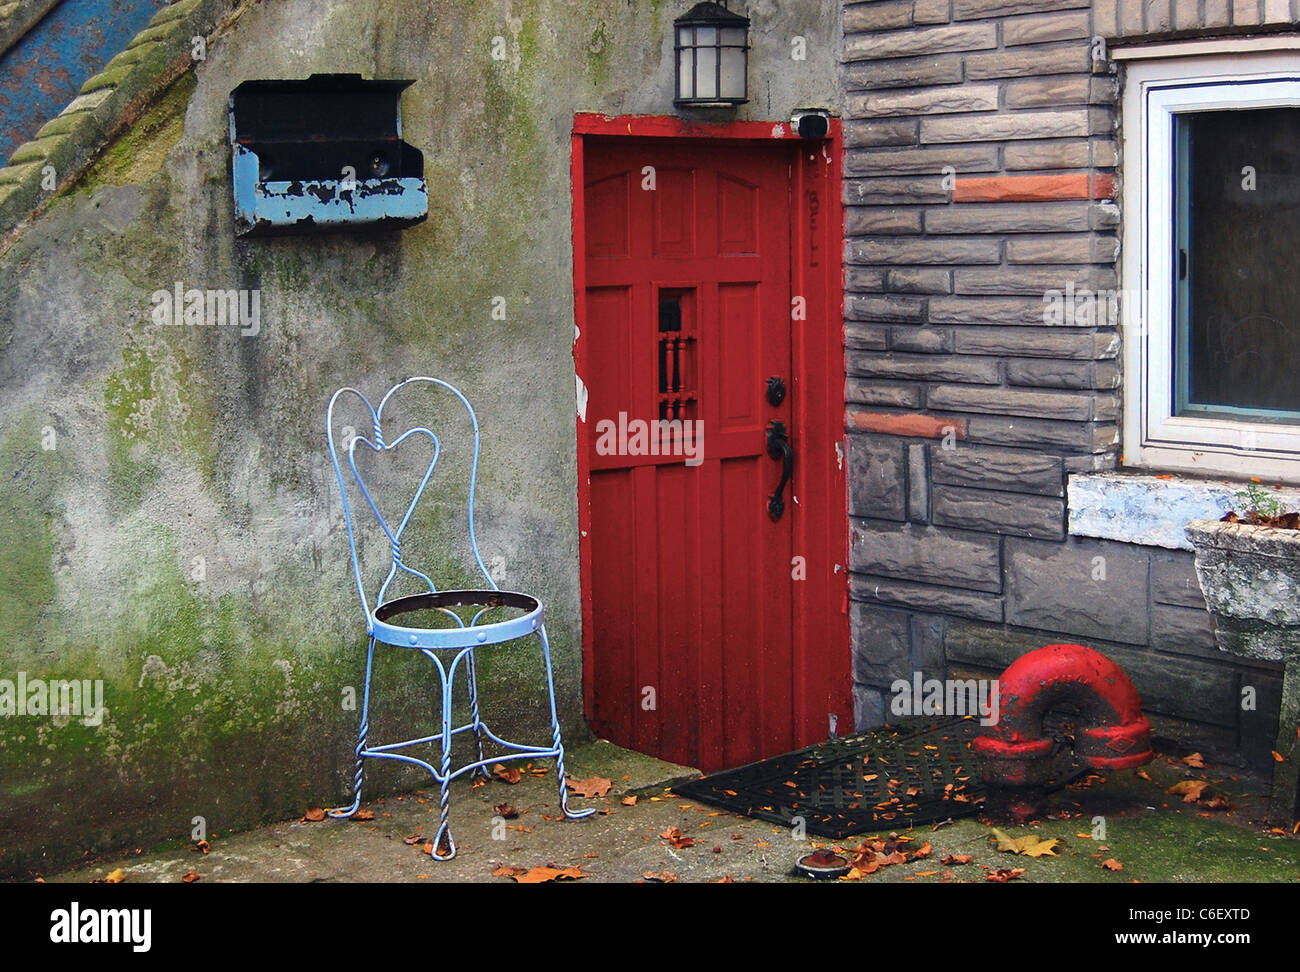 Basement apartment with red door and antique wire garden chair Stock Photo